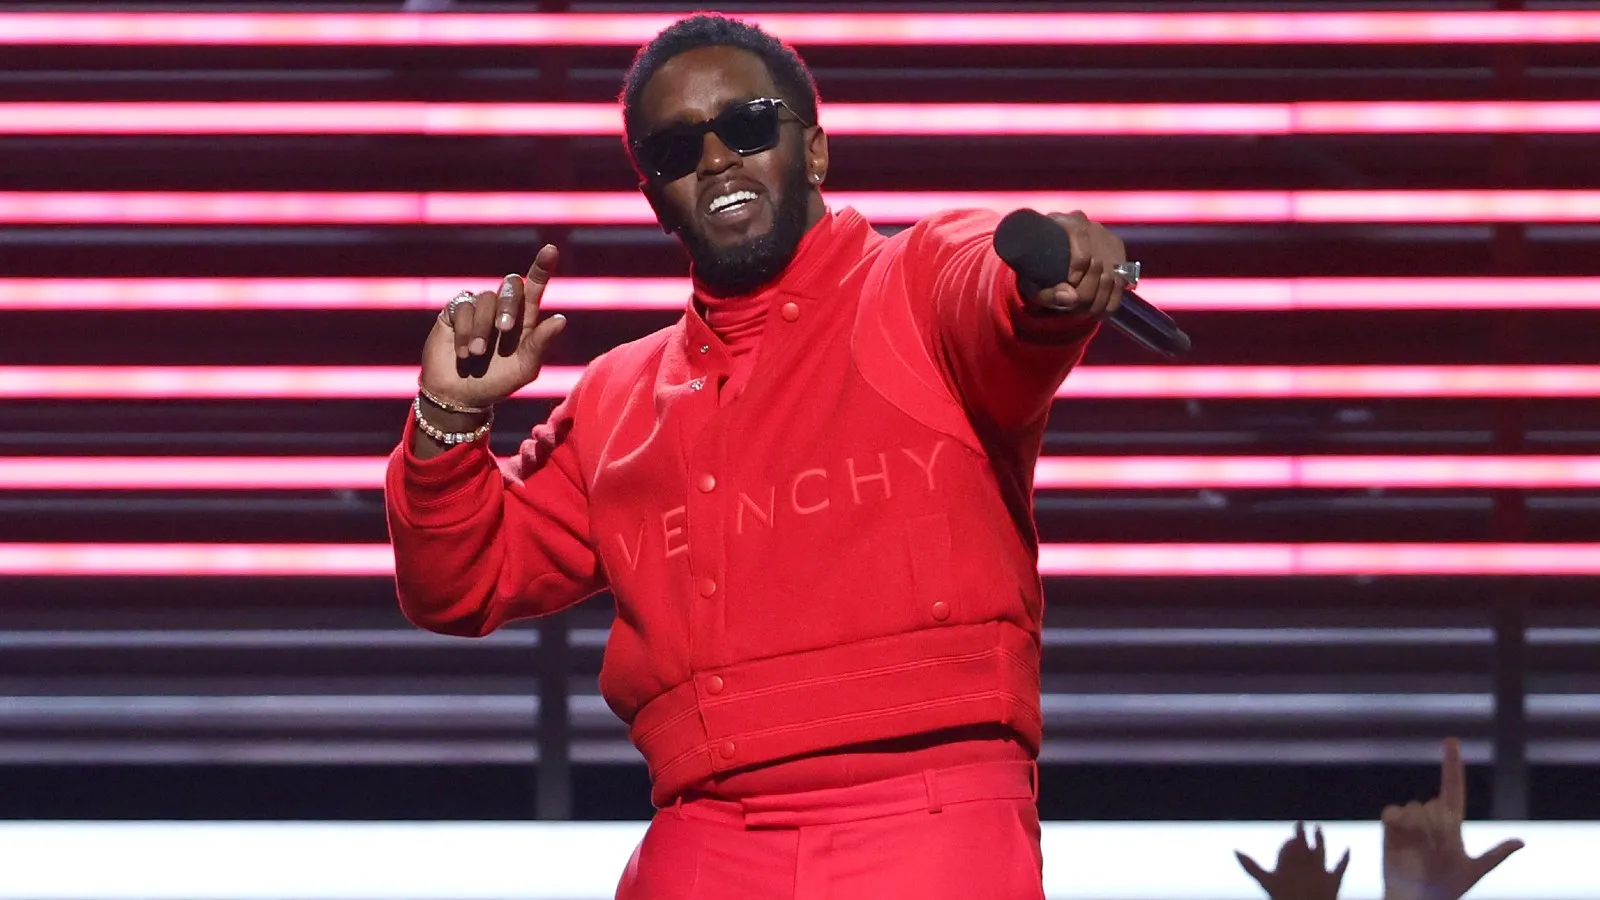 Fans Are Sure Sean ‘Diddy’ Combs’ Stellar Halloween Costume Won Him a Direct Ticket to DCU